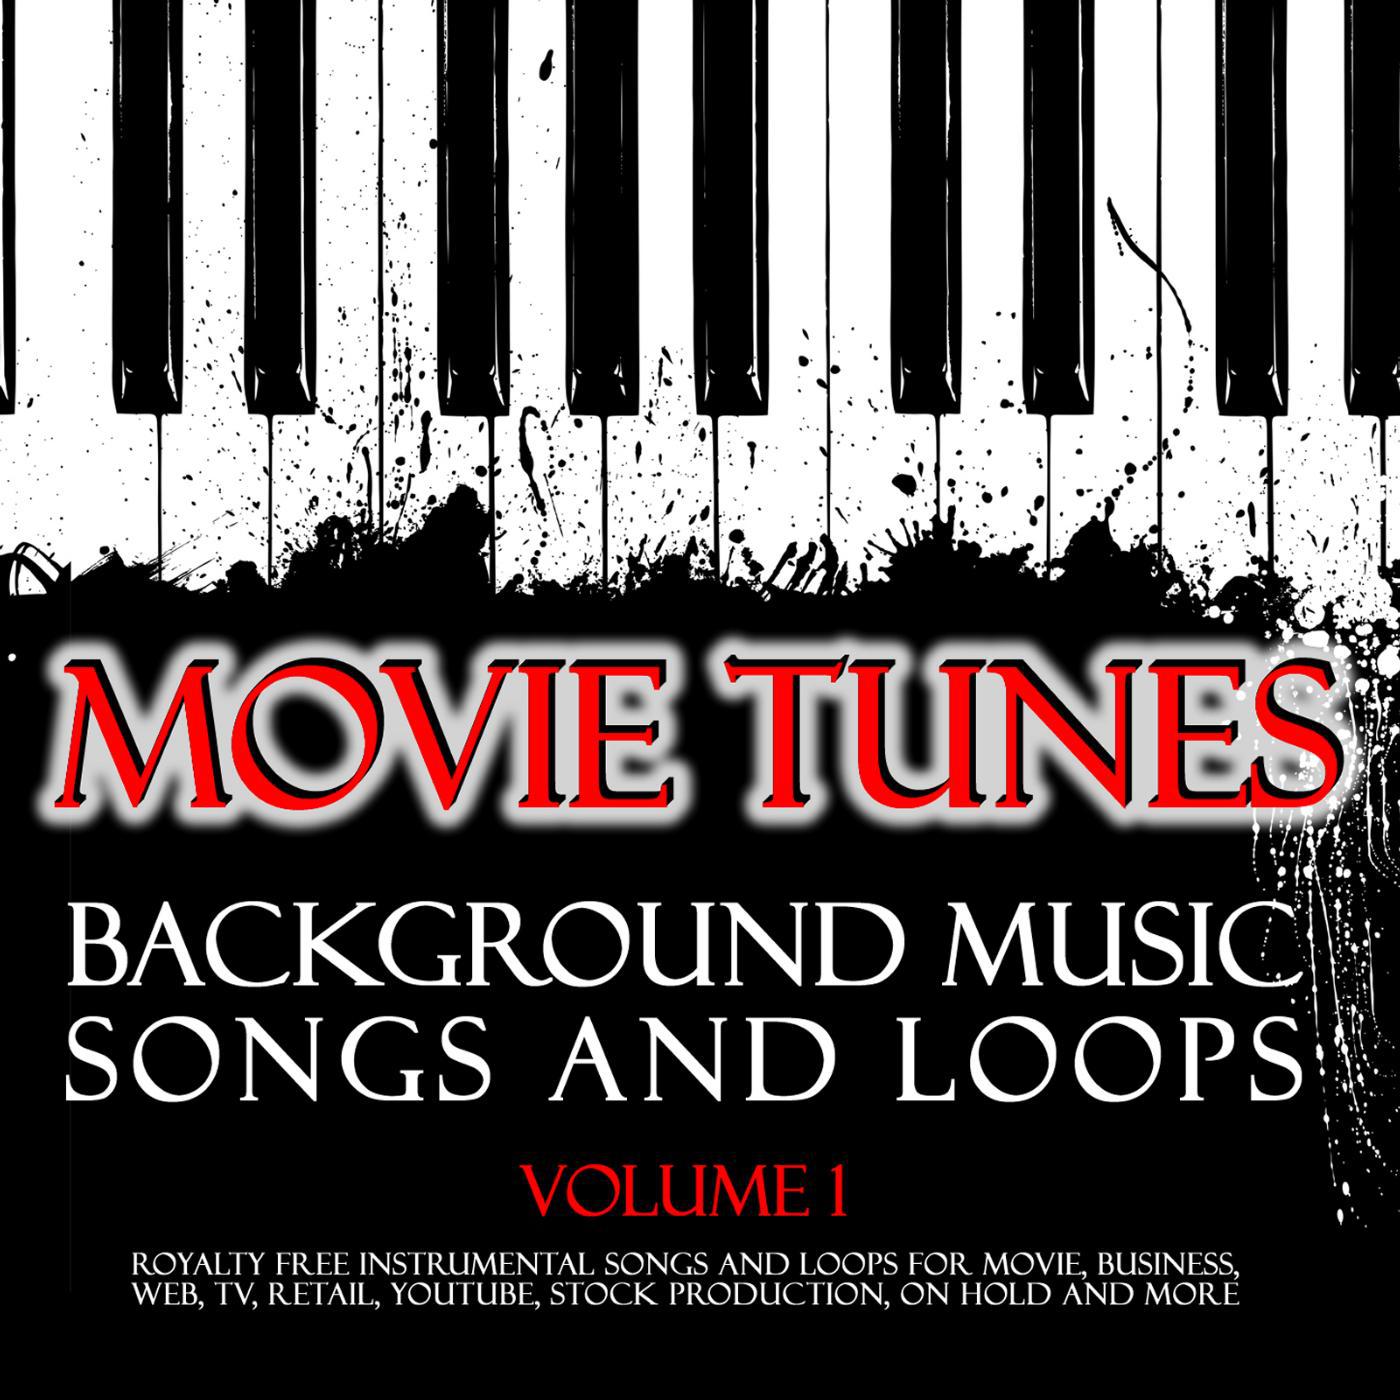 Постер альбома Movie Tunes Royalty Free Background Music Songs and Loops. Vol. 1. Instrumentals for TV, Video, Web & More.